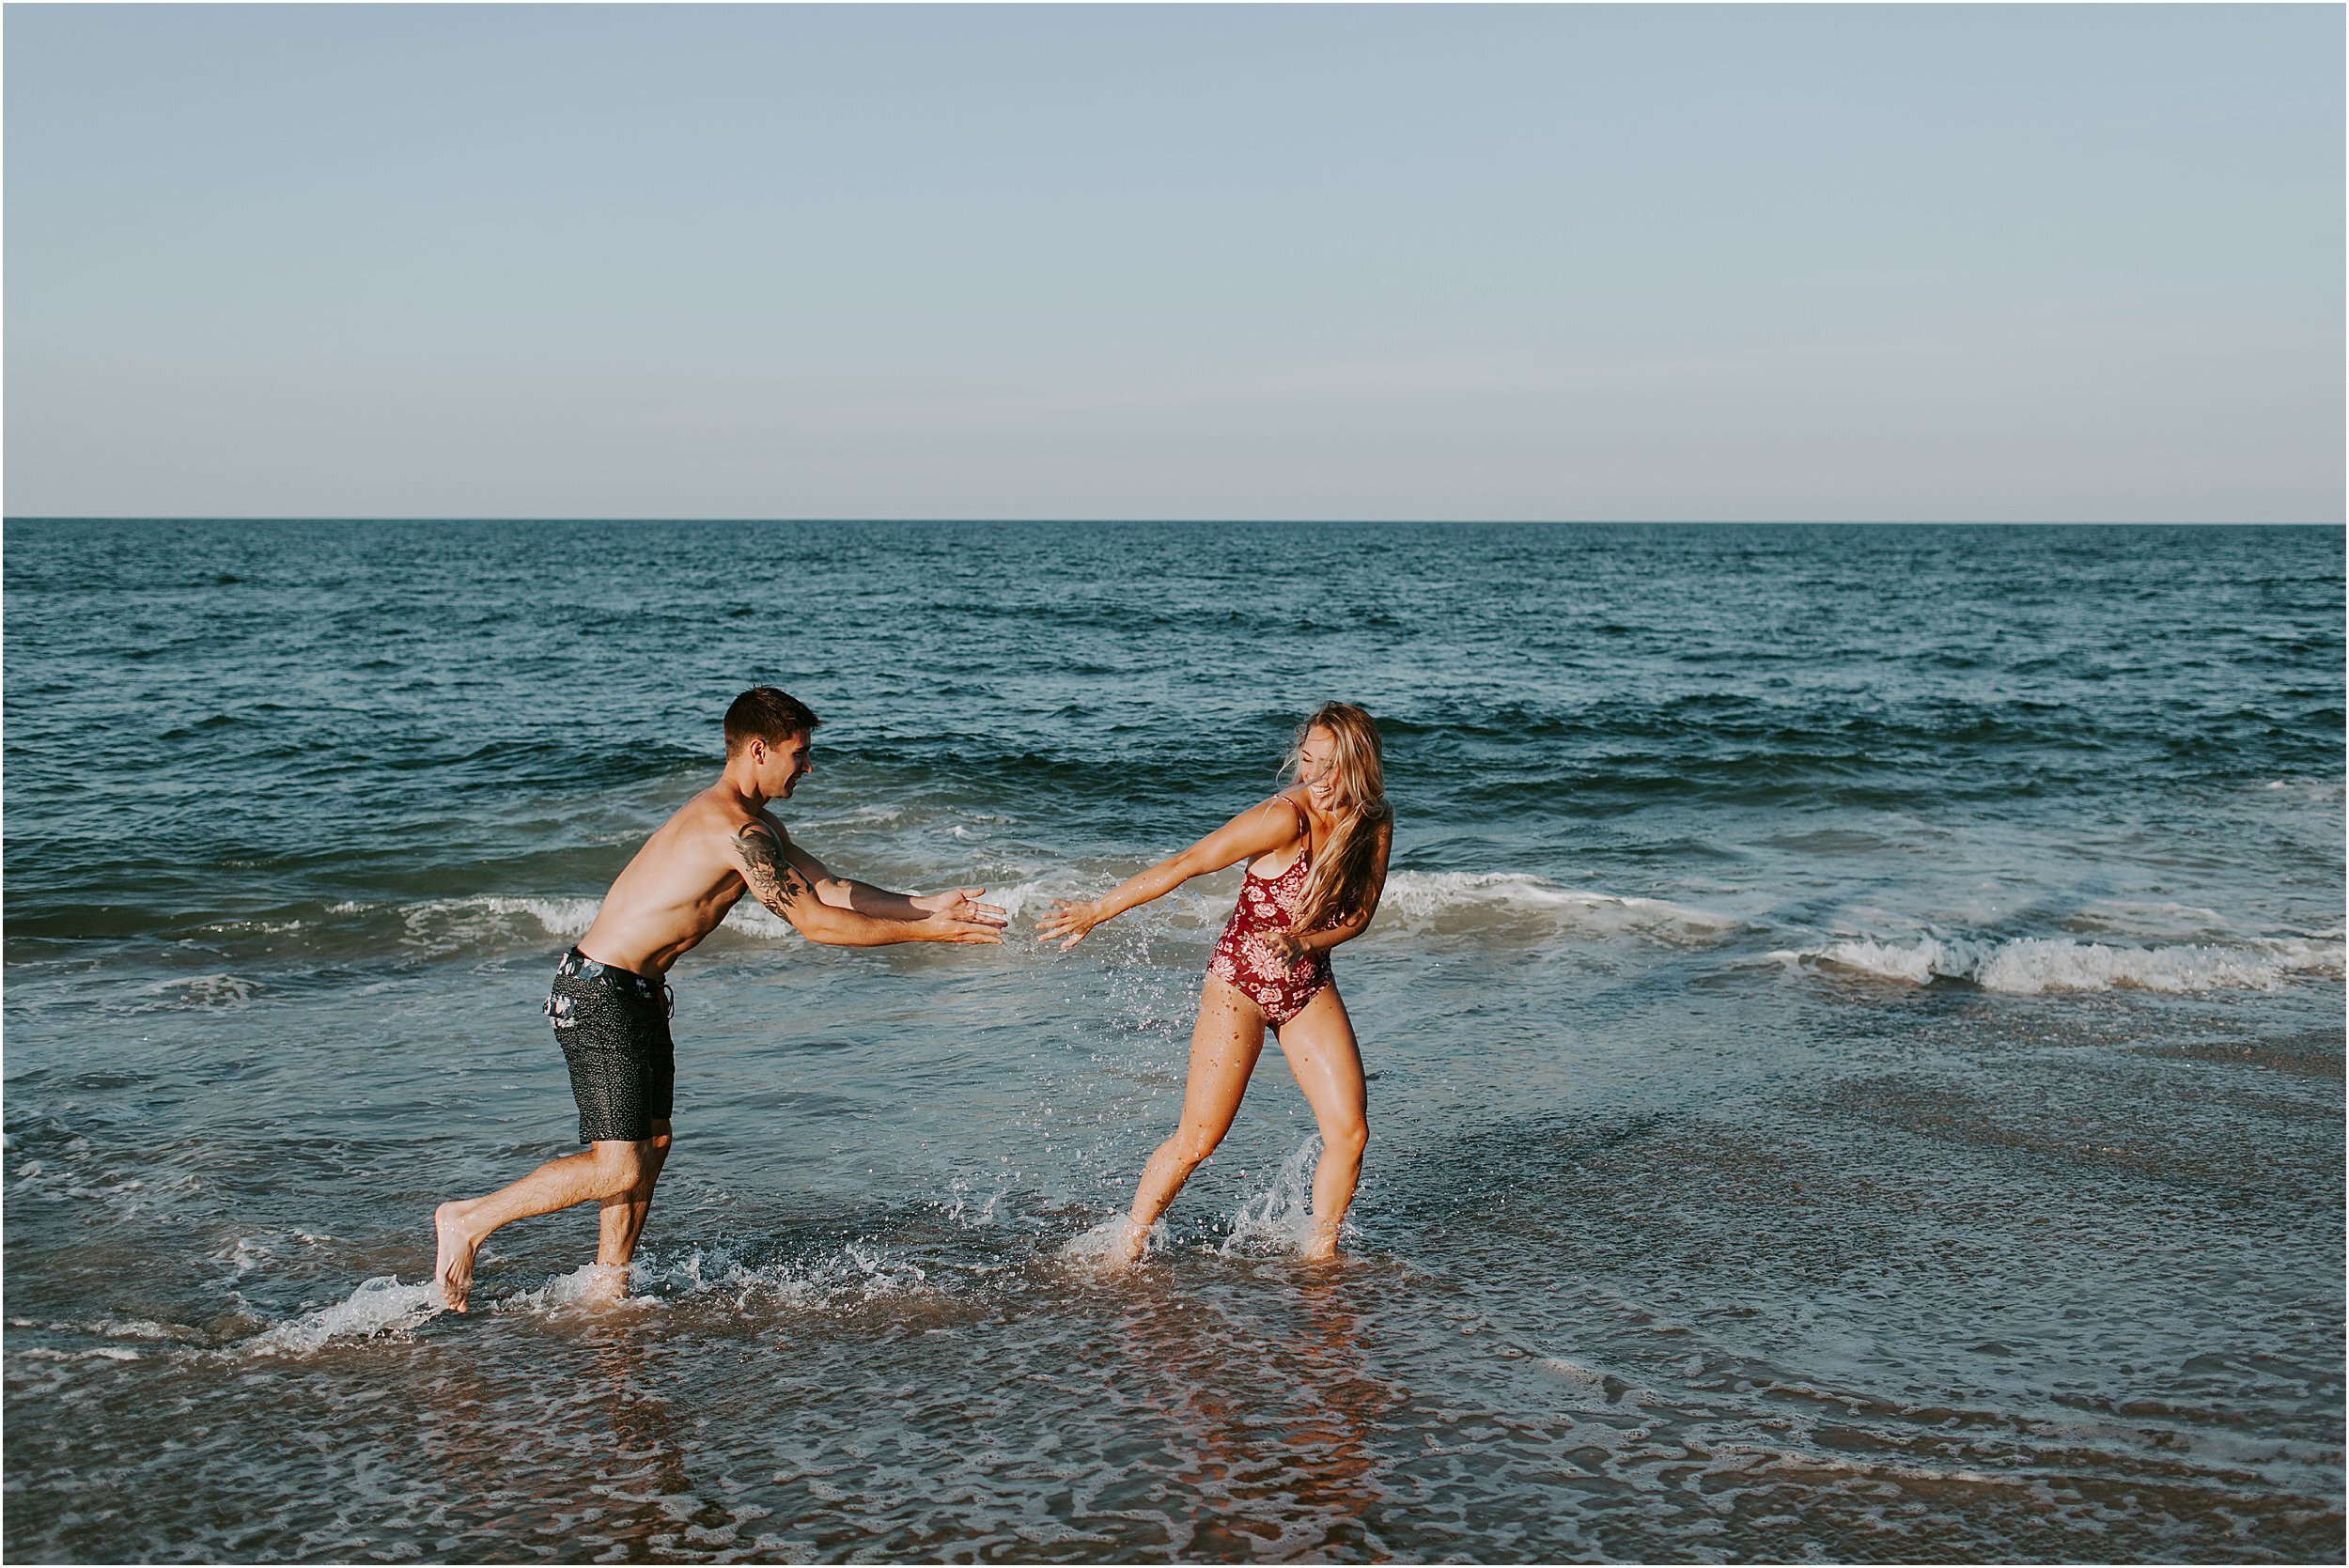  A couple in bathing suits plays in the water at the beach. 